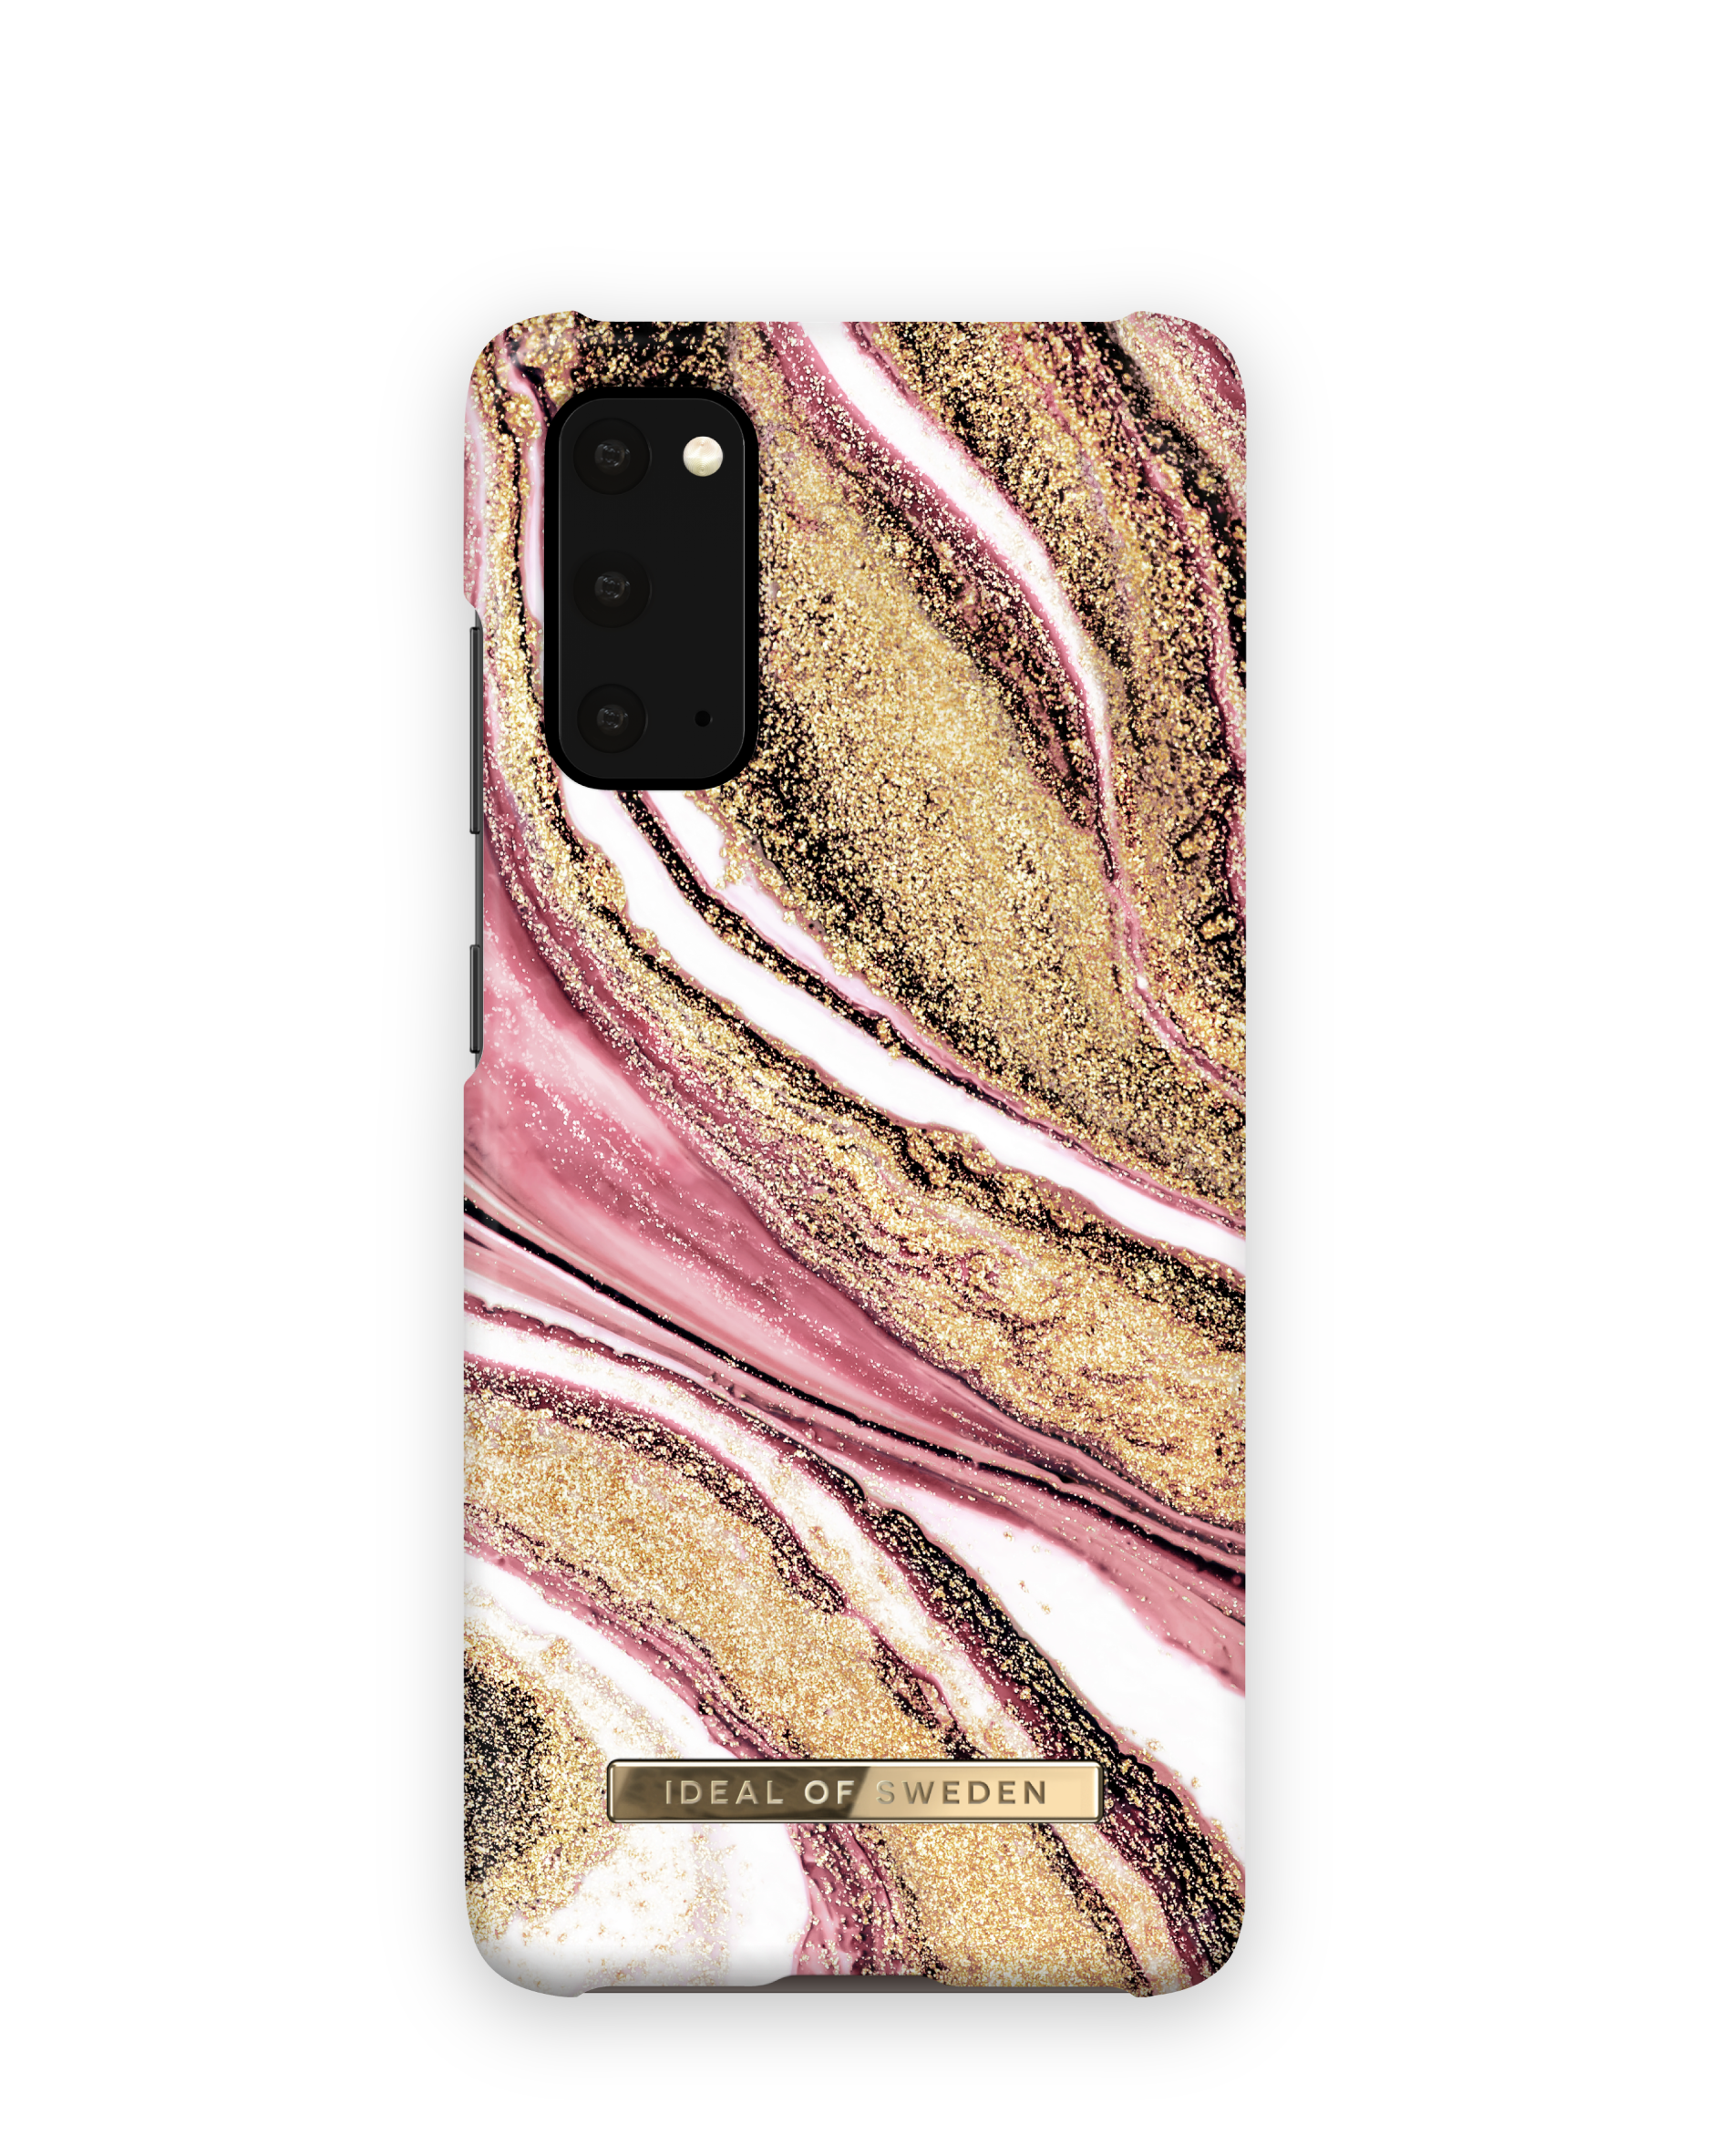 IDEAL OF SWEDEN IDFCSS20-S11E-193, Backcover, Pink Galaxy S20, Cosmic Swirl Samsung